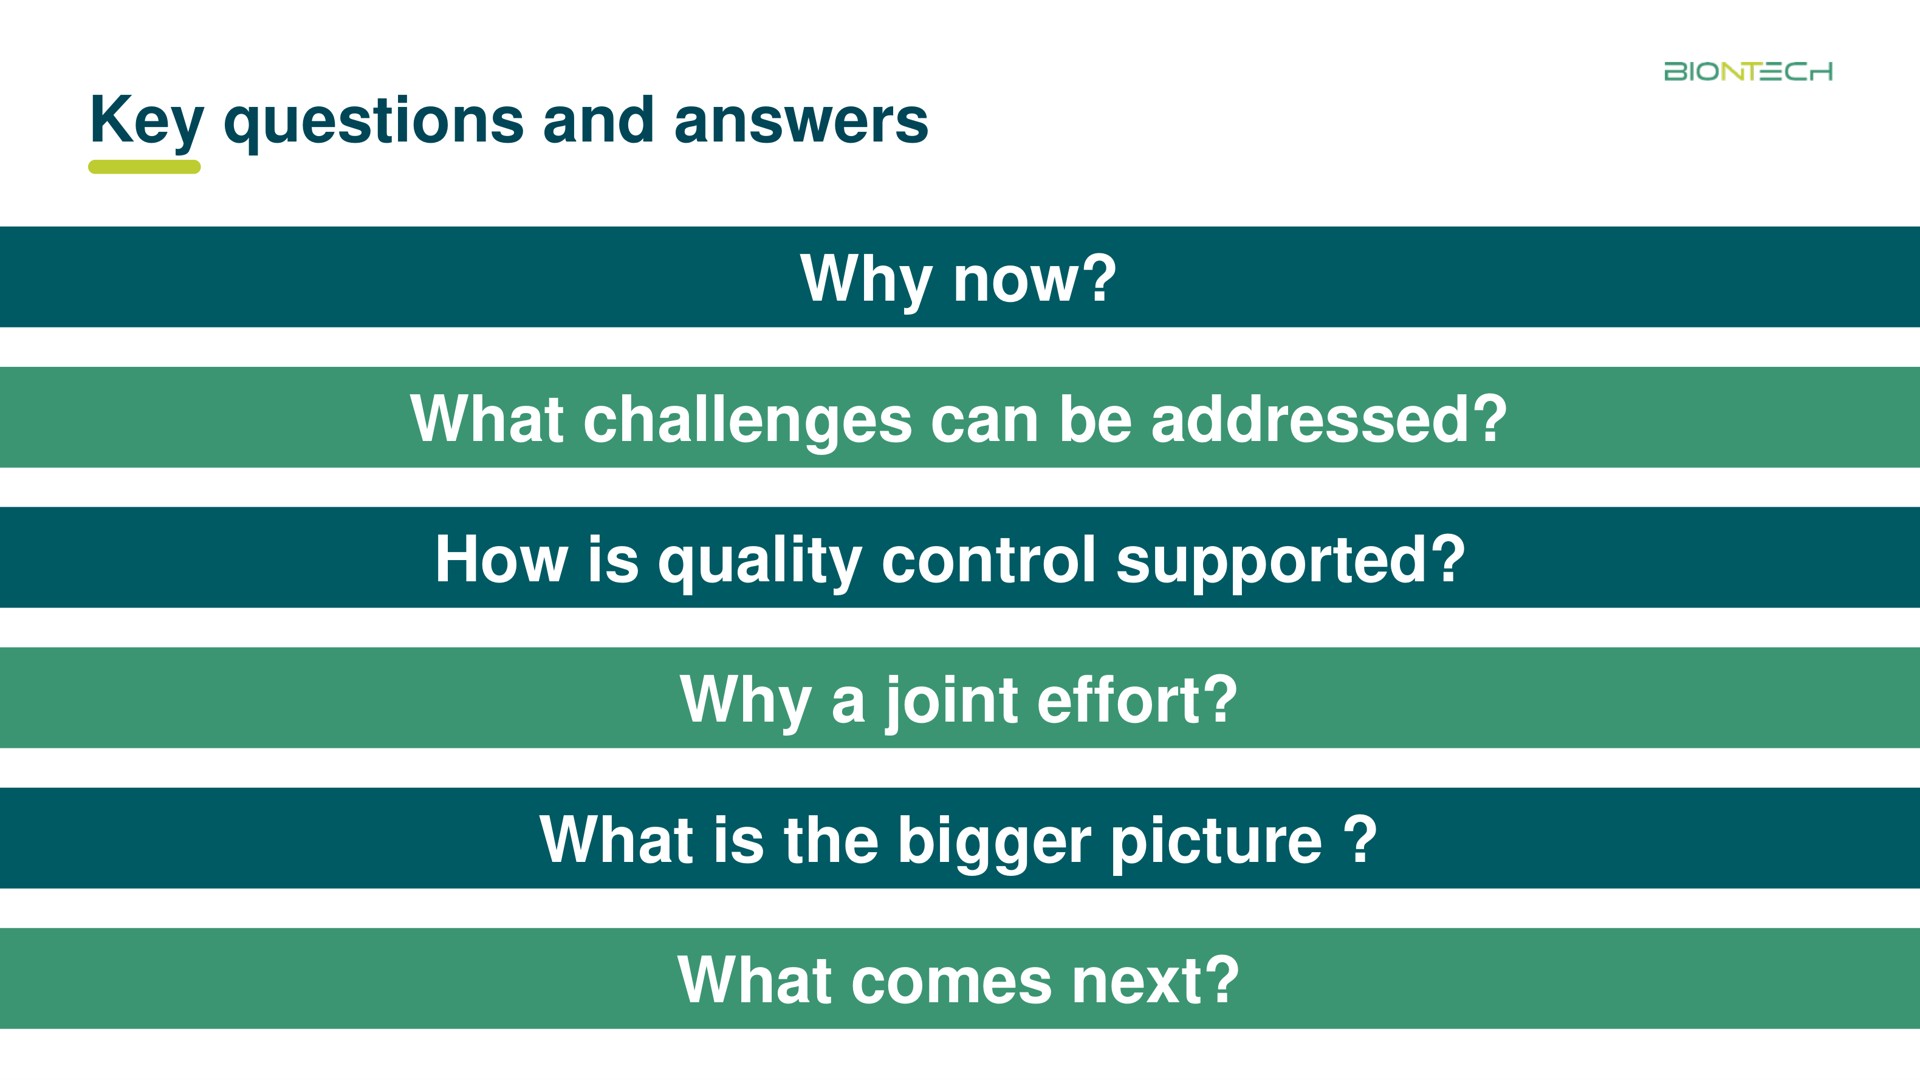 key questions and answers why now what challenges can be addressed how is quality control supported why a joint effort what is the bigger picture what comes next | BioNTech